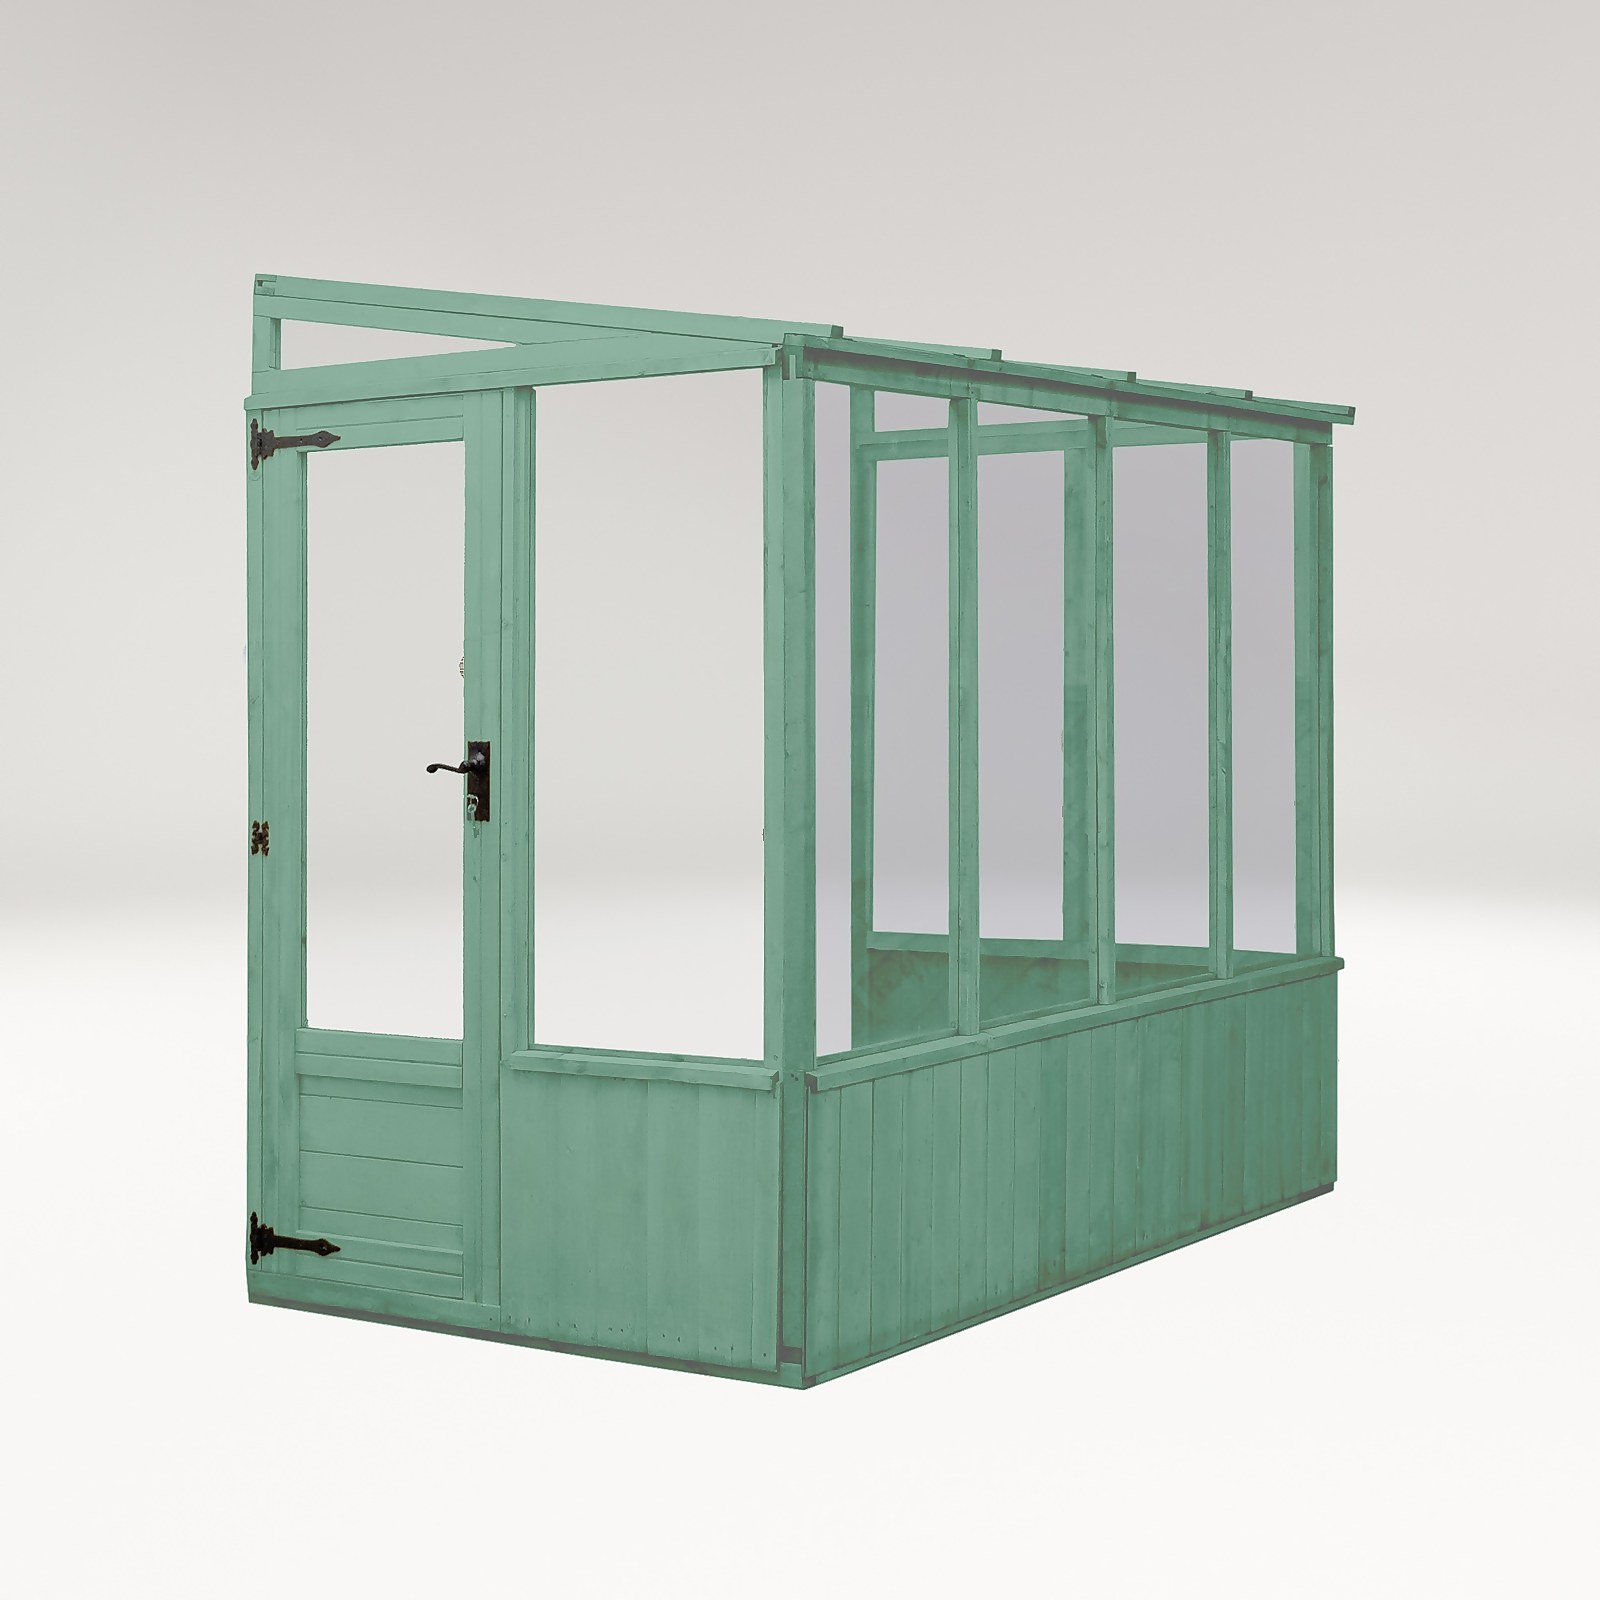 Country Living Southwell 8 x 4ft Premium Lean Too Greenhouse Painted + Installation - Aurora Green